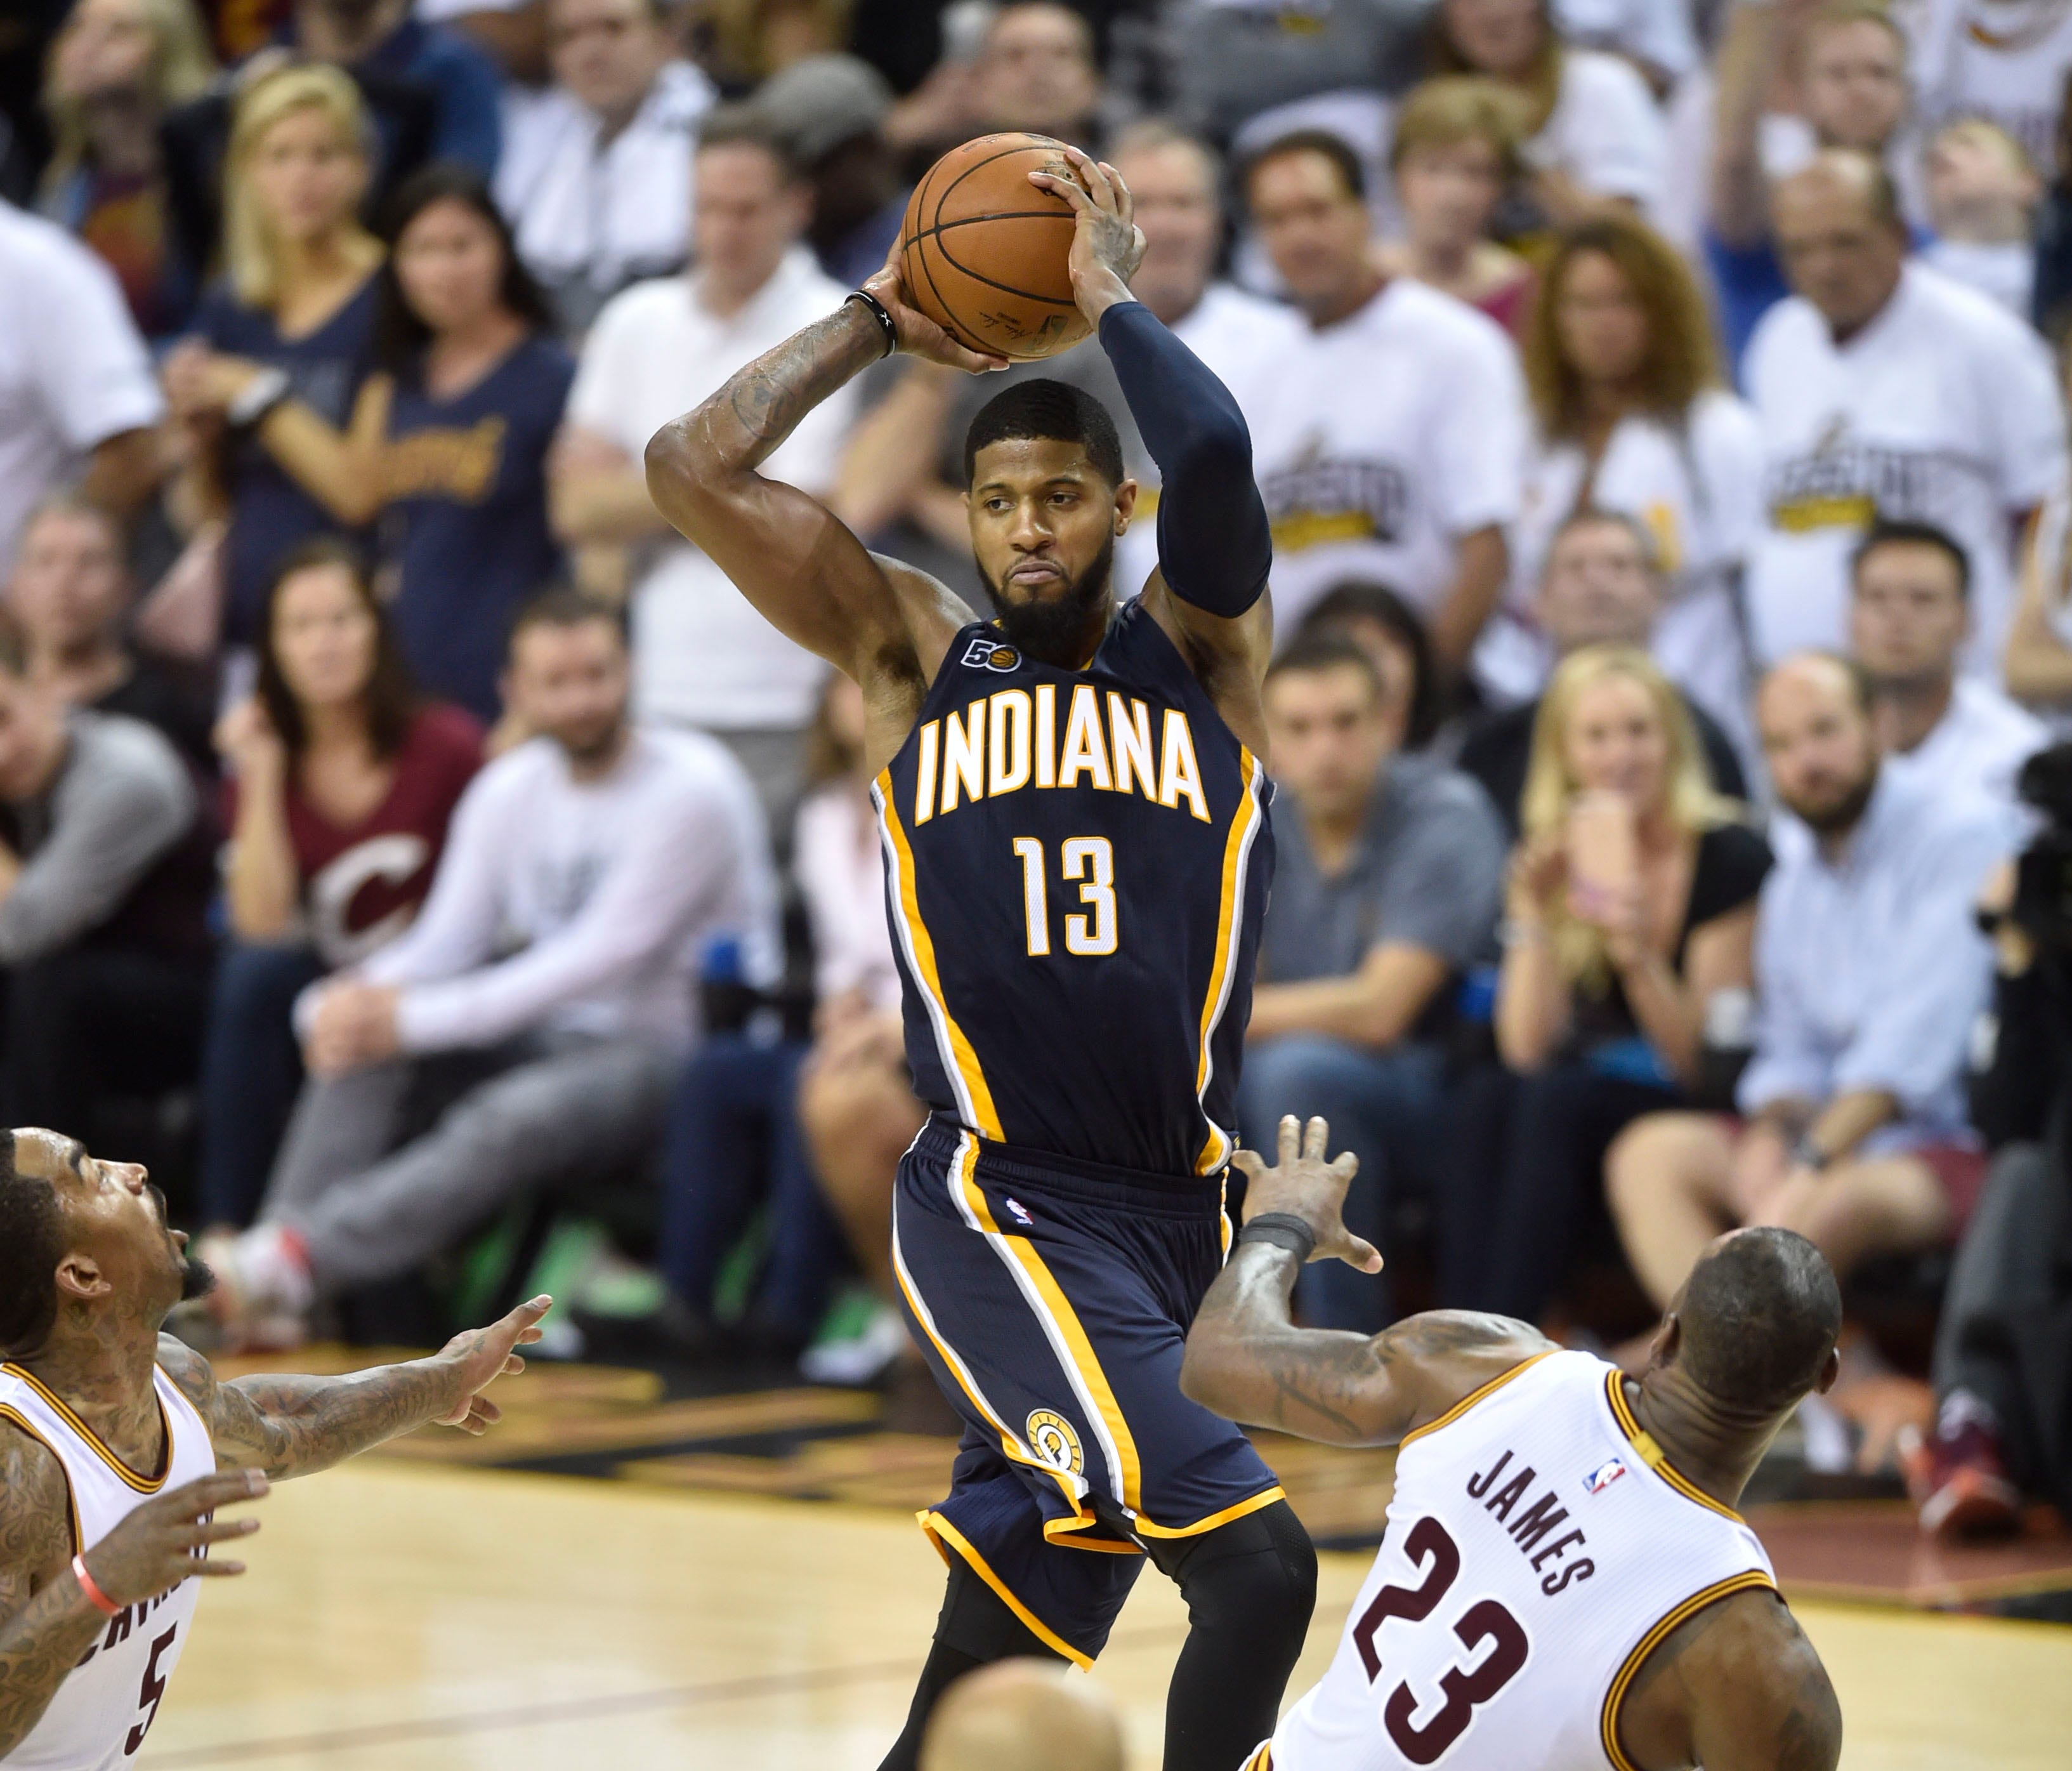 Apr 15, 2017; Cleveland, OH, USA; Indiana Pacers forward Paul George (13) throws a pass late in the fourth quarter against the Cleveland Cavaliers in game one of the first round of the 2017 NBA Playoffs at Quicken Loans Arena. Mandatory Credit: David